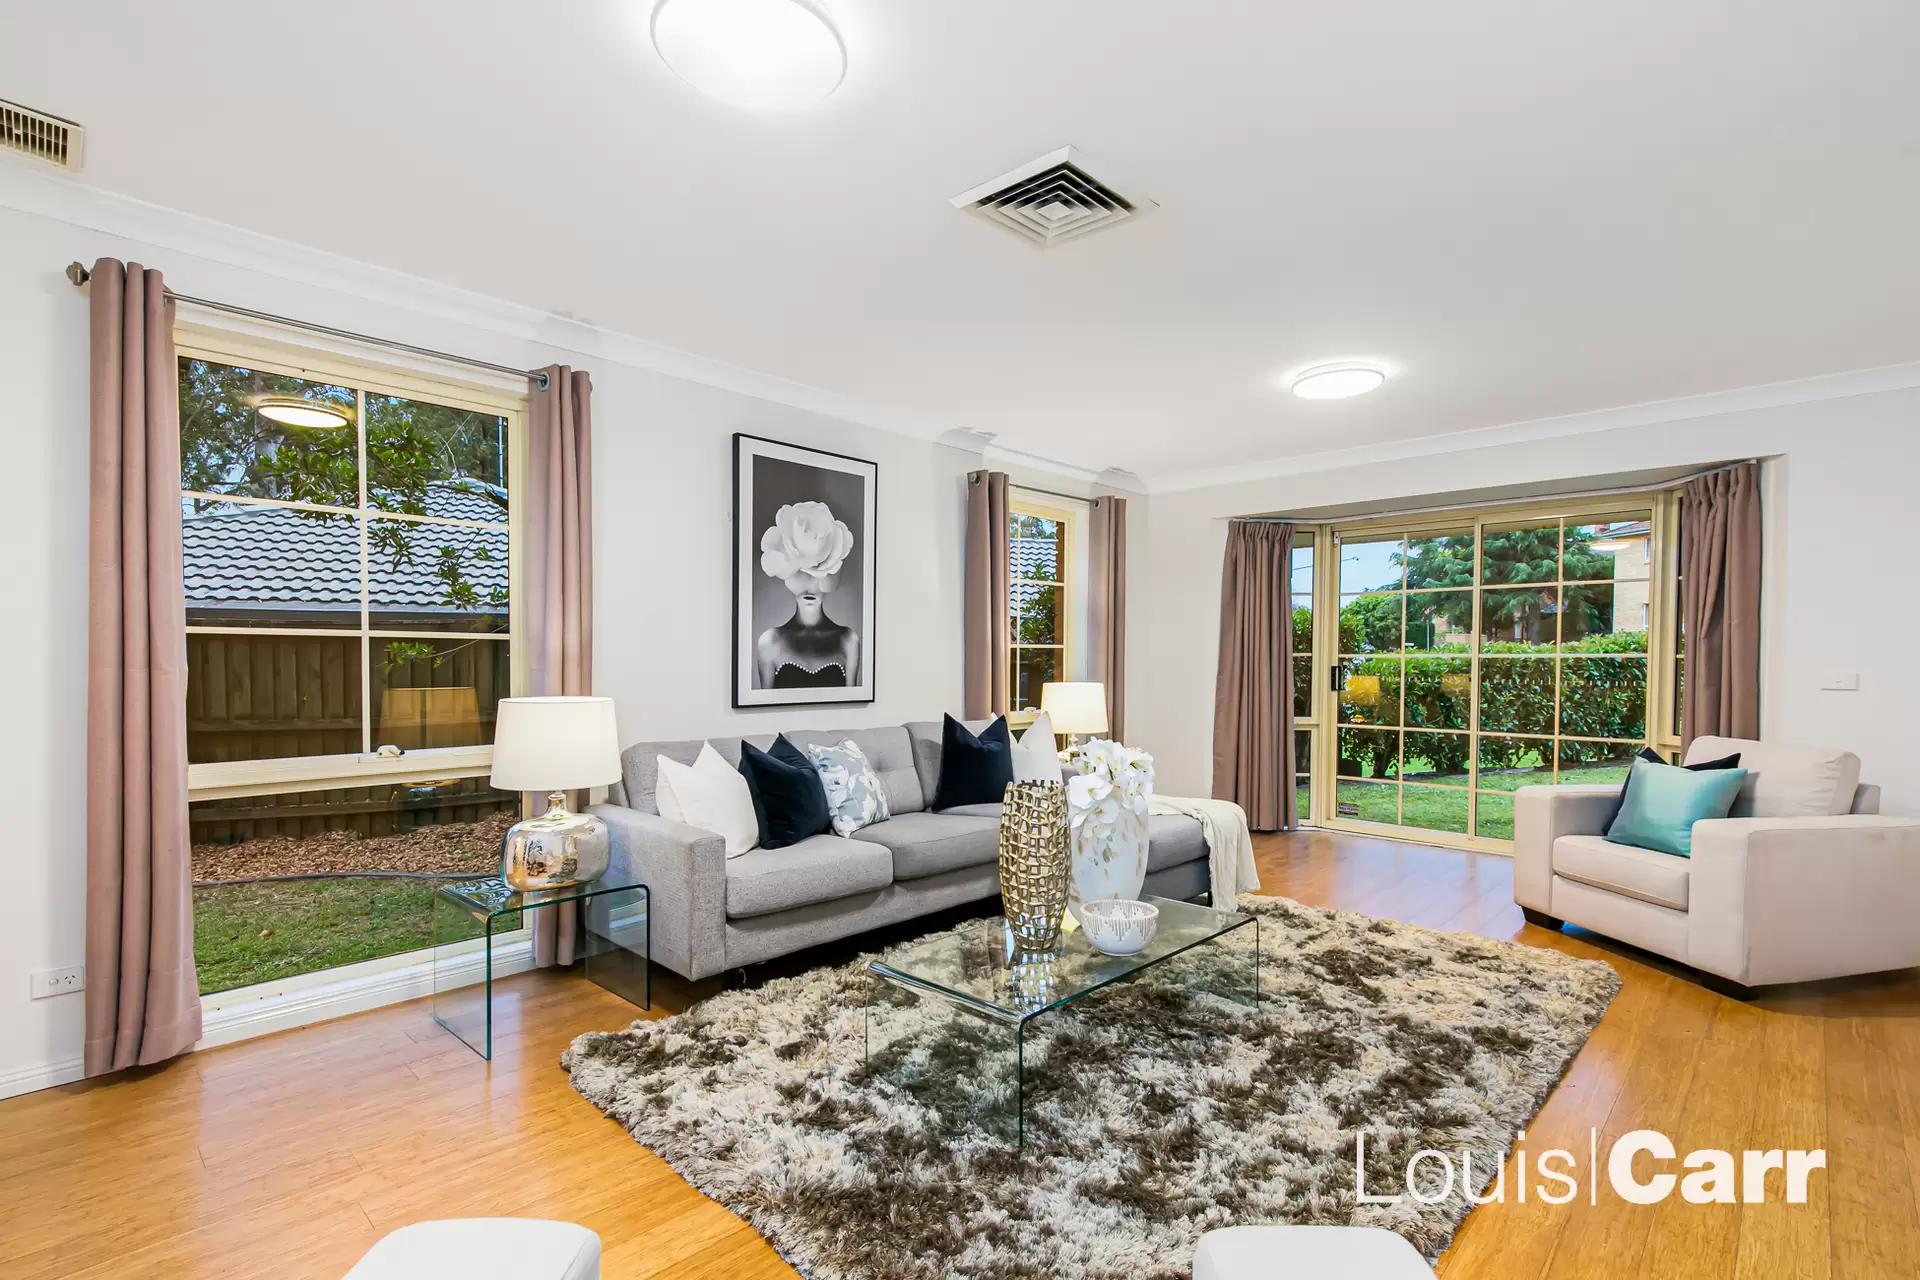 Photo #3: 37 Darlington Drive, Cherrybrook - Sold by Louis Carr Real Estate